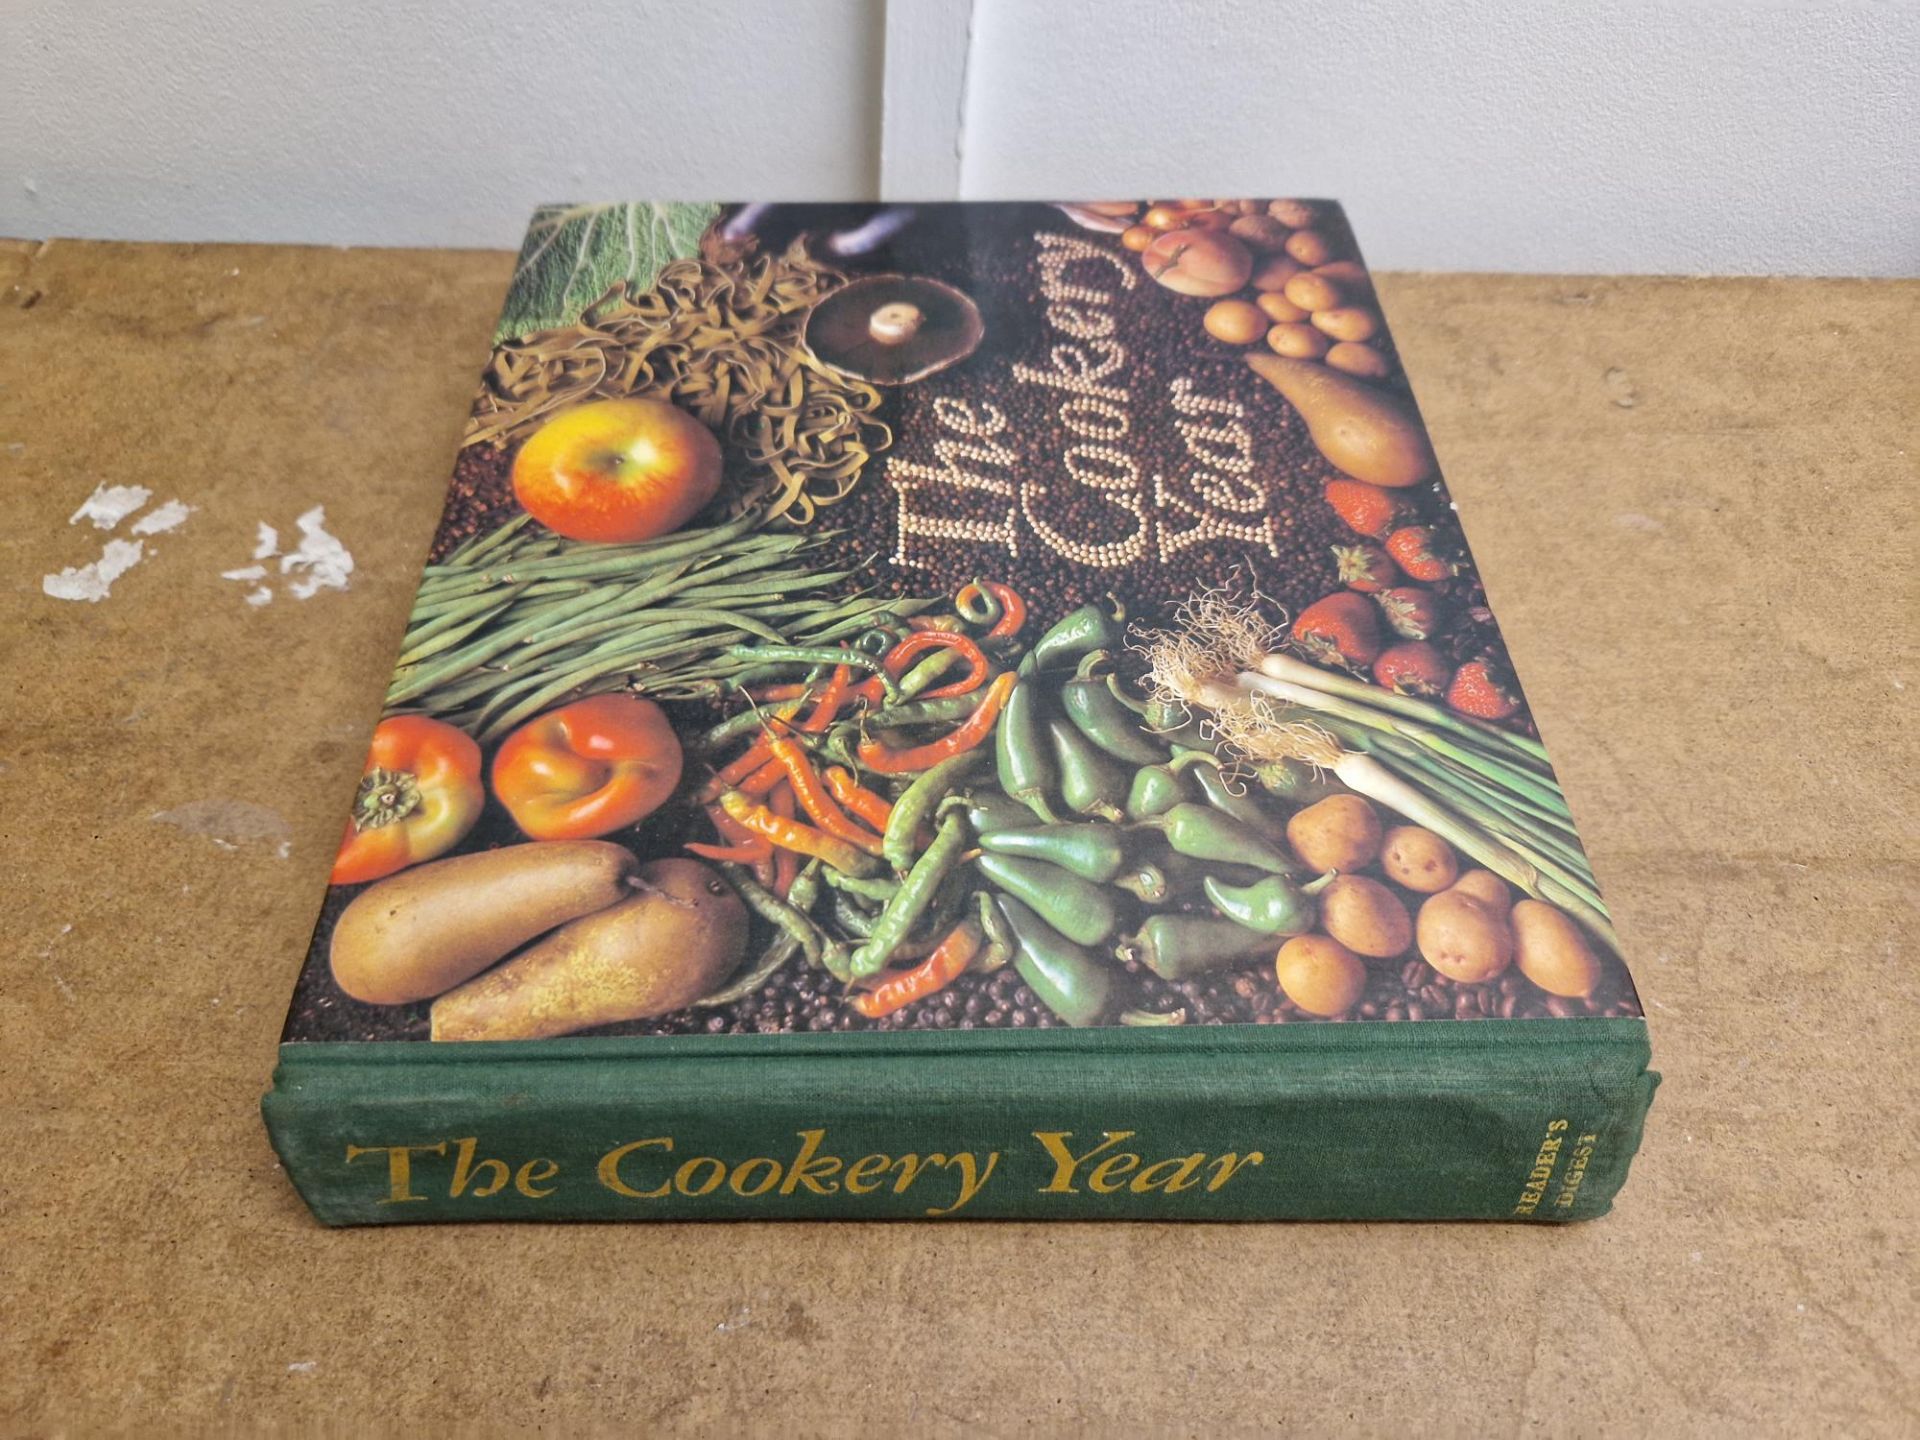 The cookery year book